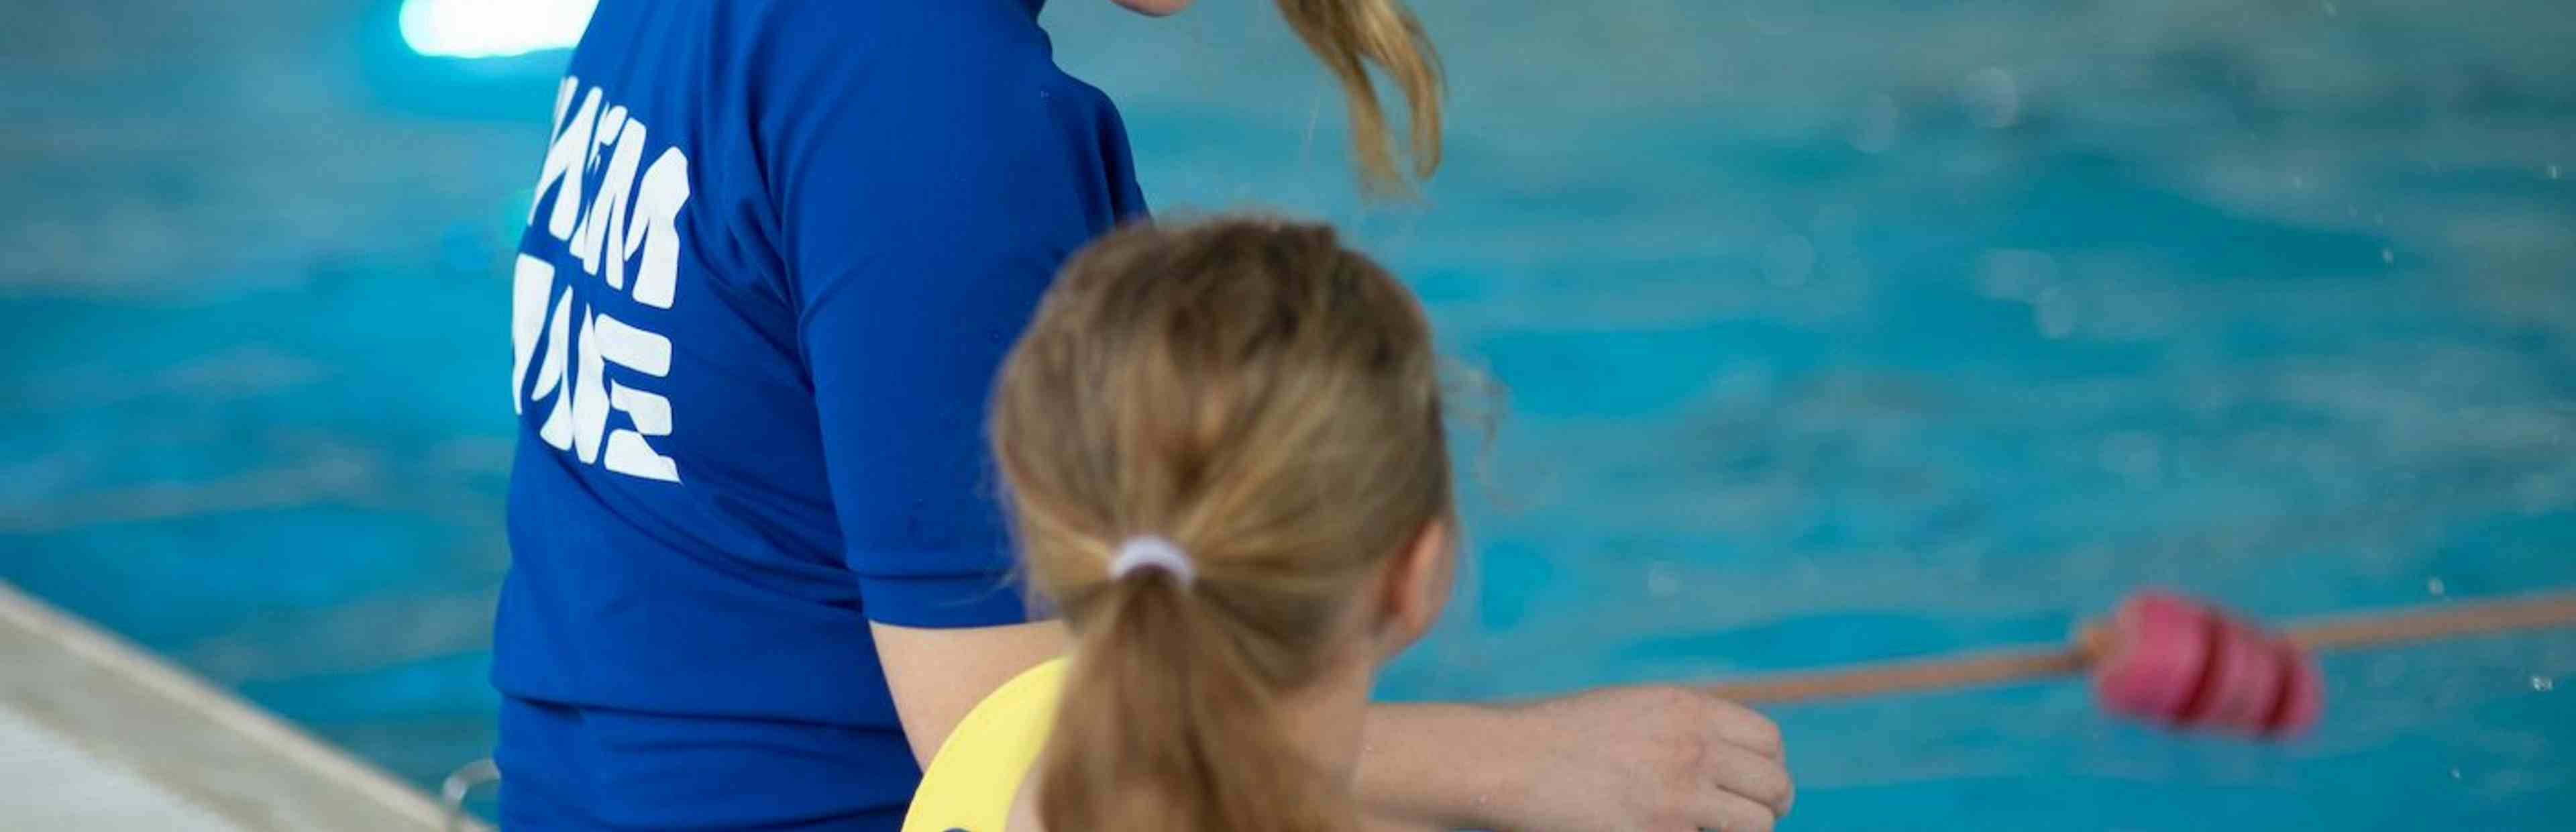 Swimming instructor and child sitting on side of pool